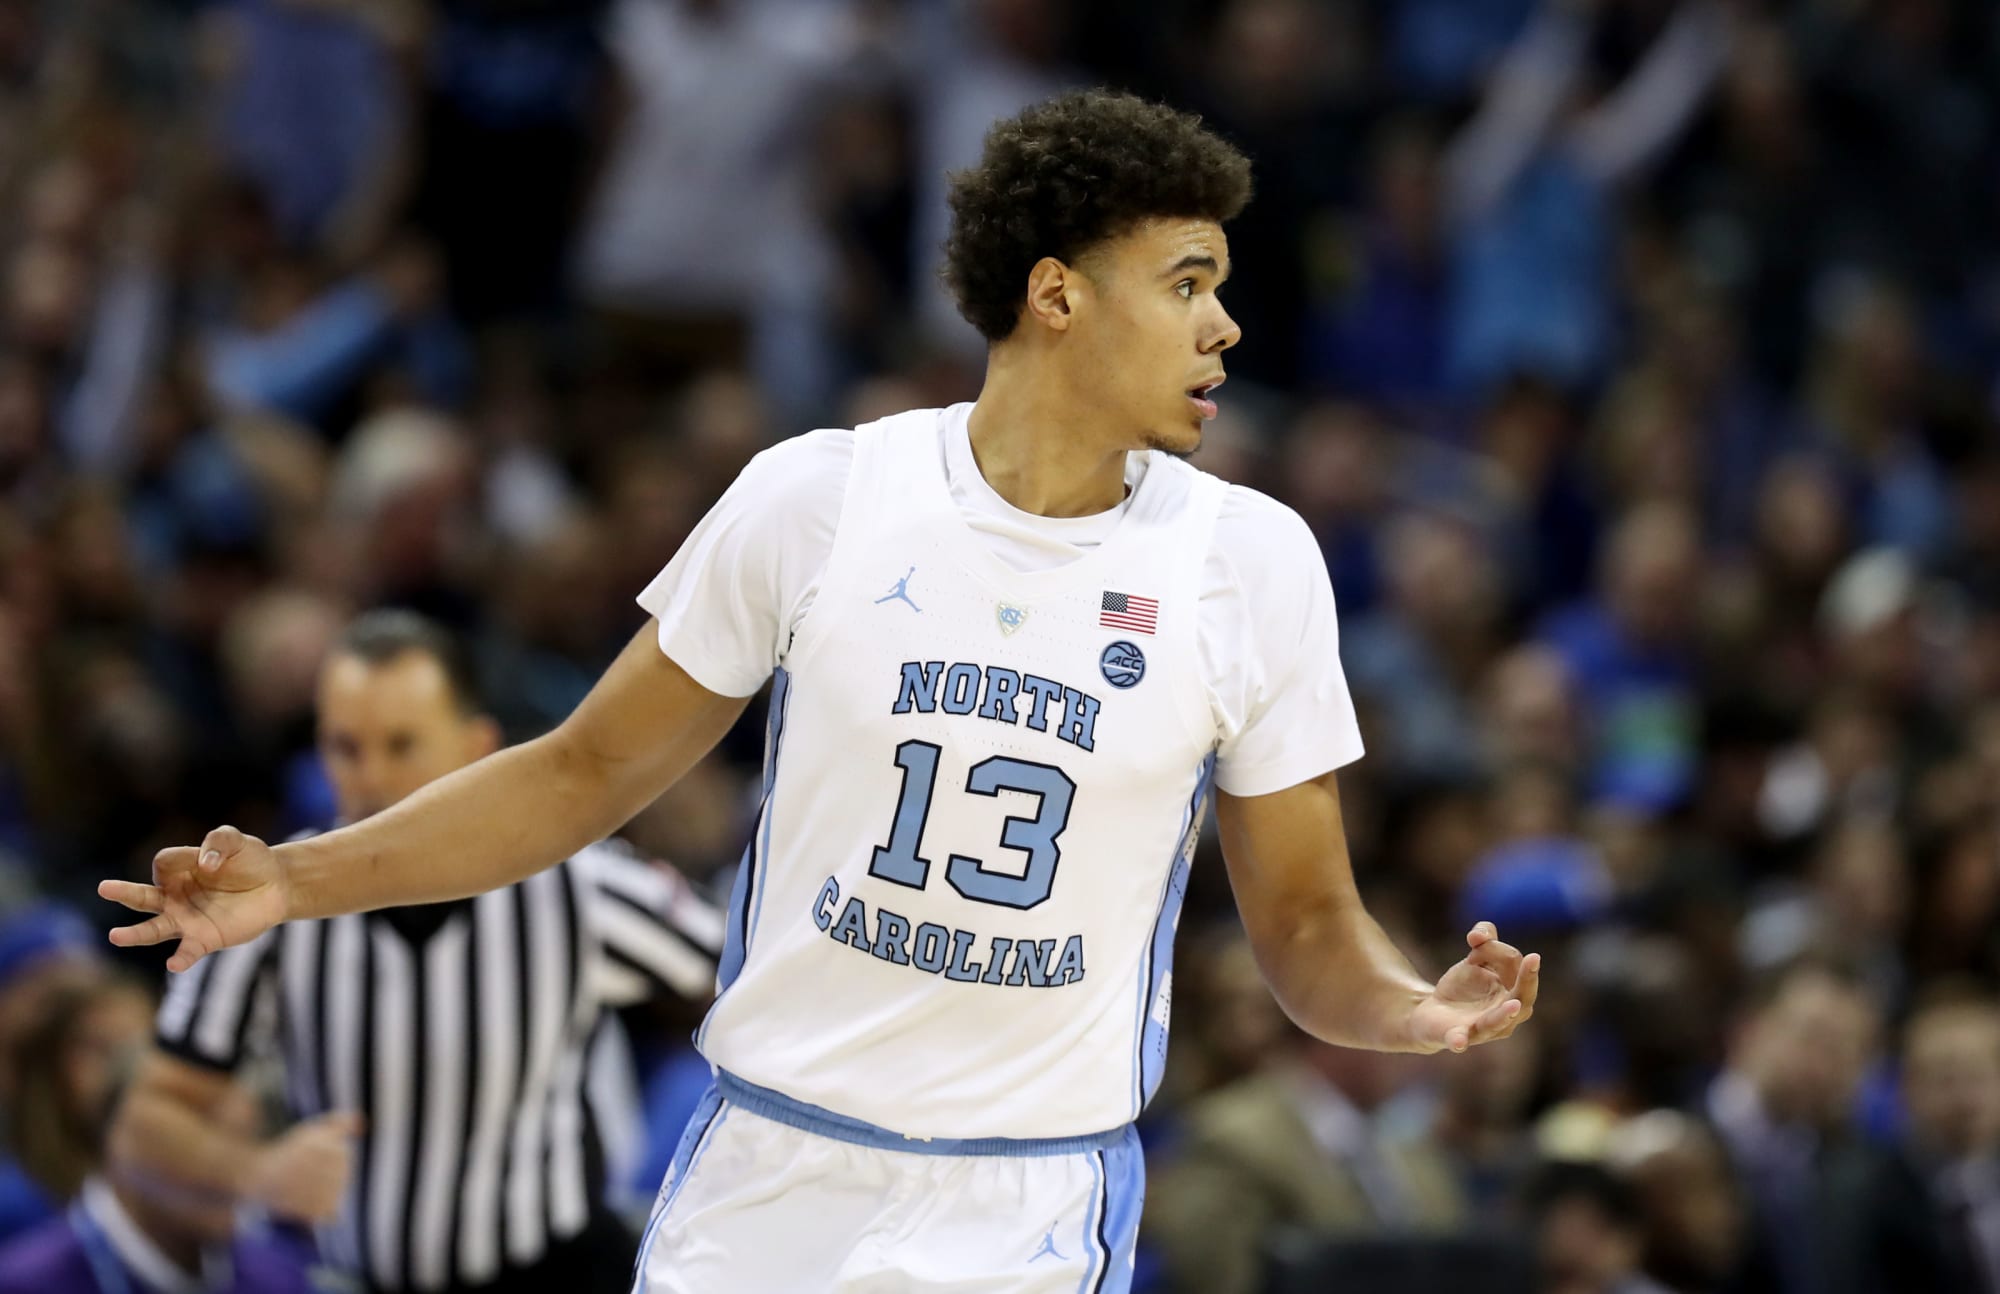 Does Cameron Johnson have a brother that plays for UNC? Taking a